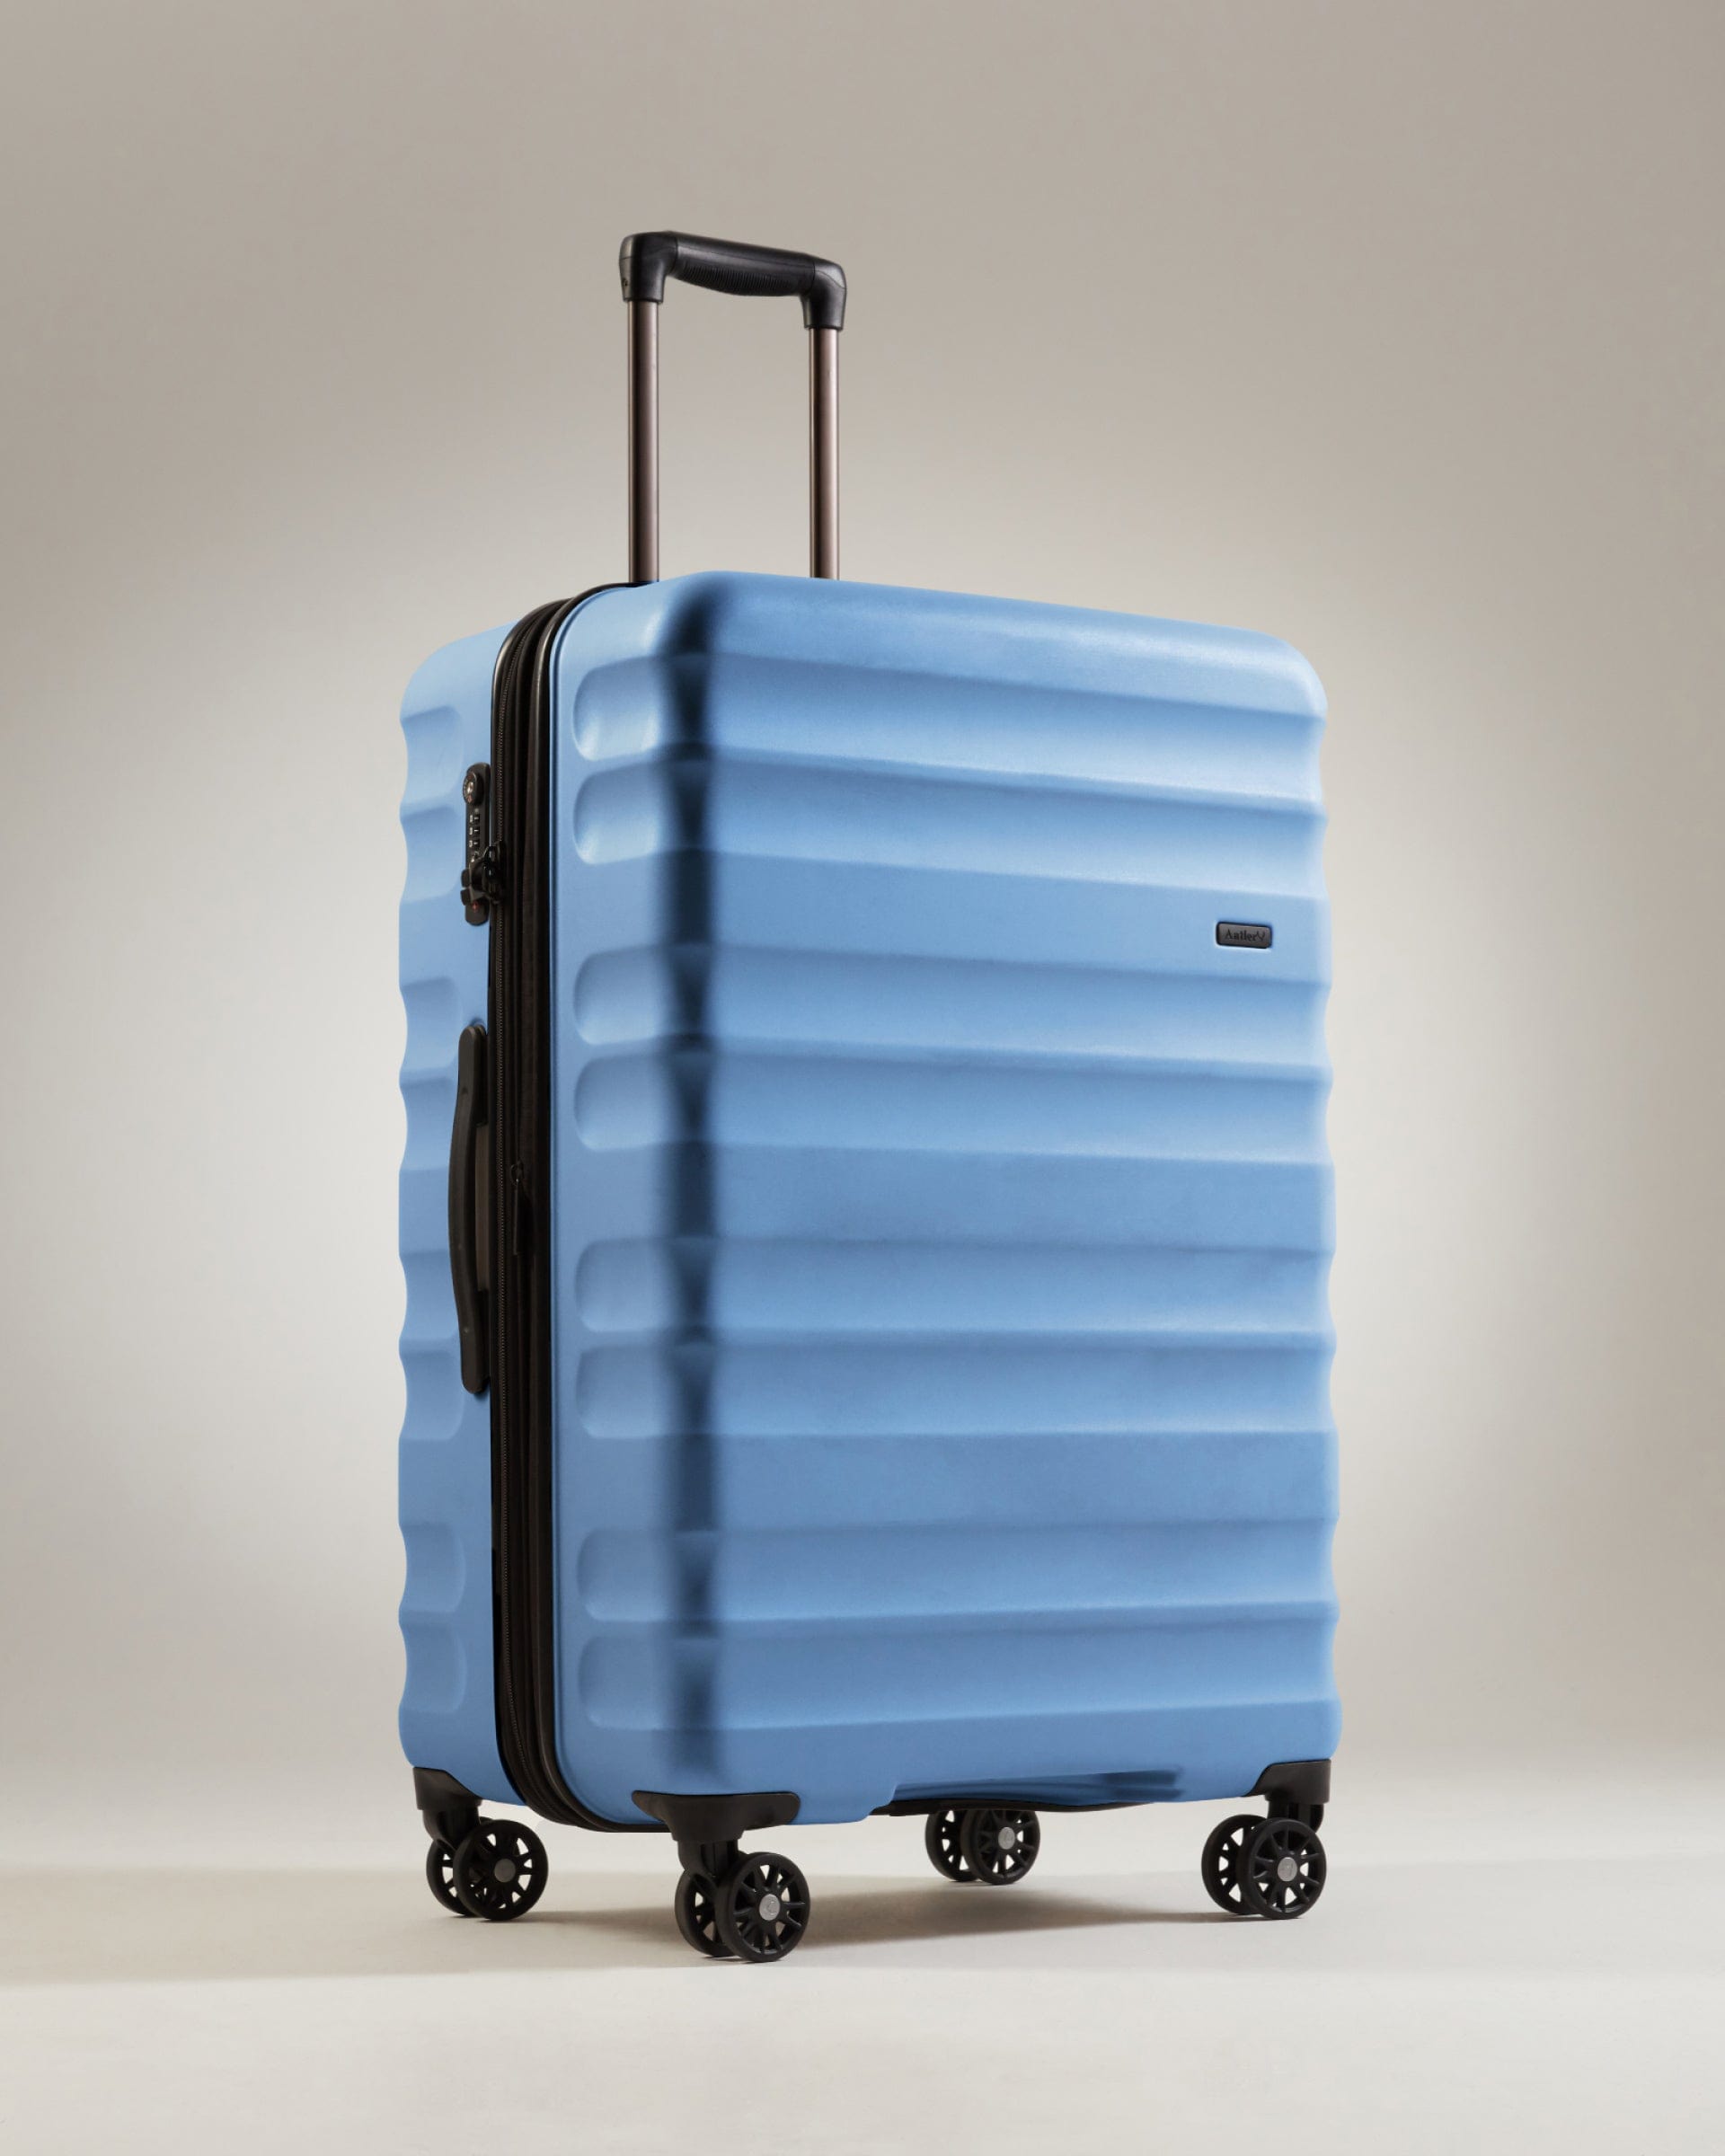 View Antler Clifton Large Suitcase In Azure Size 35 x 52 x 80 cm information